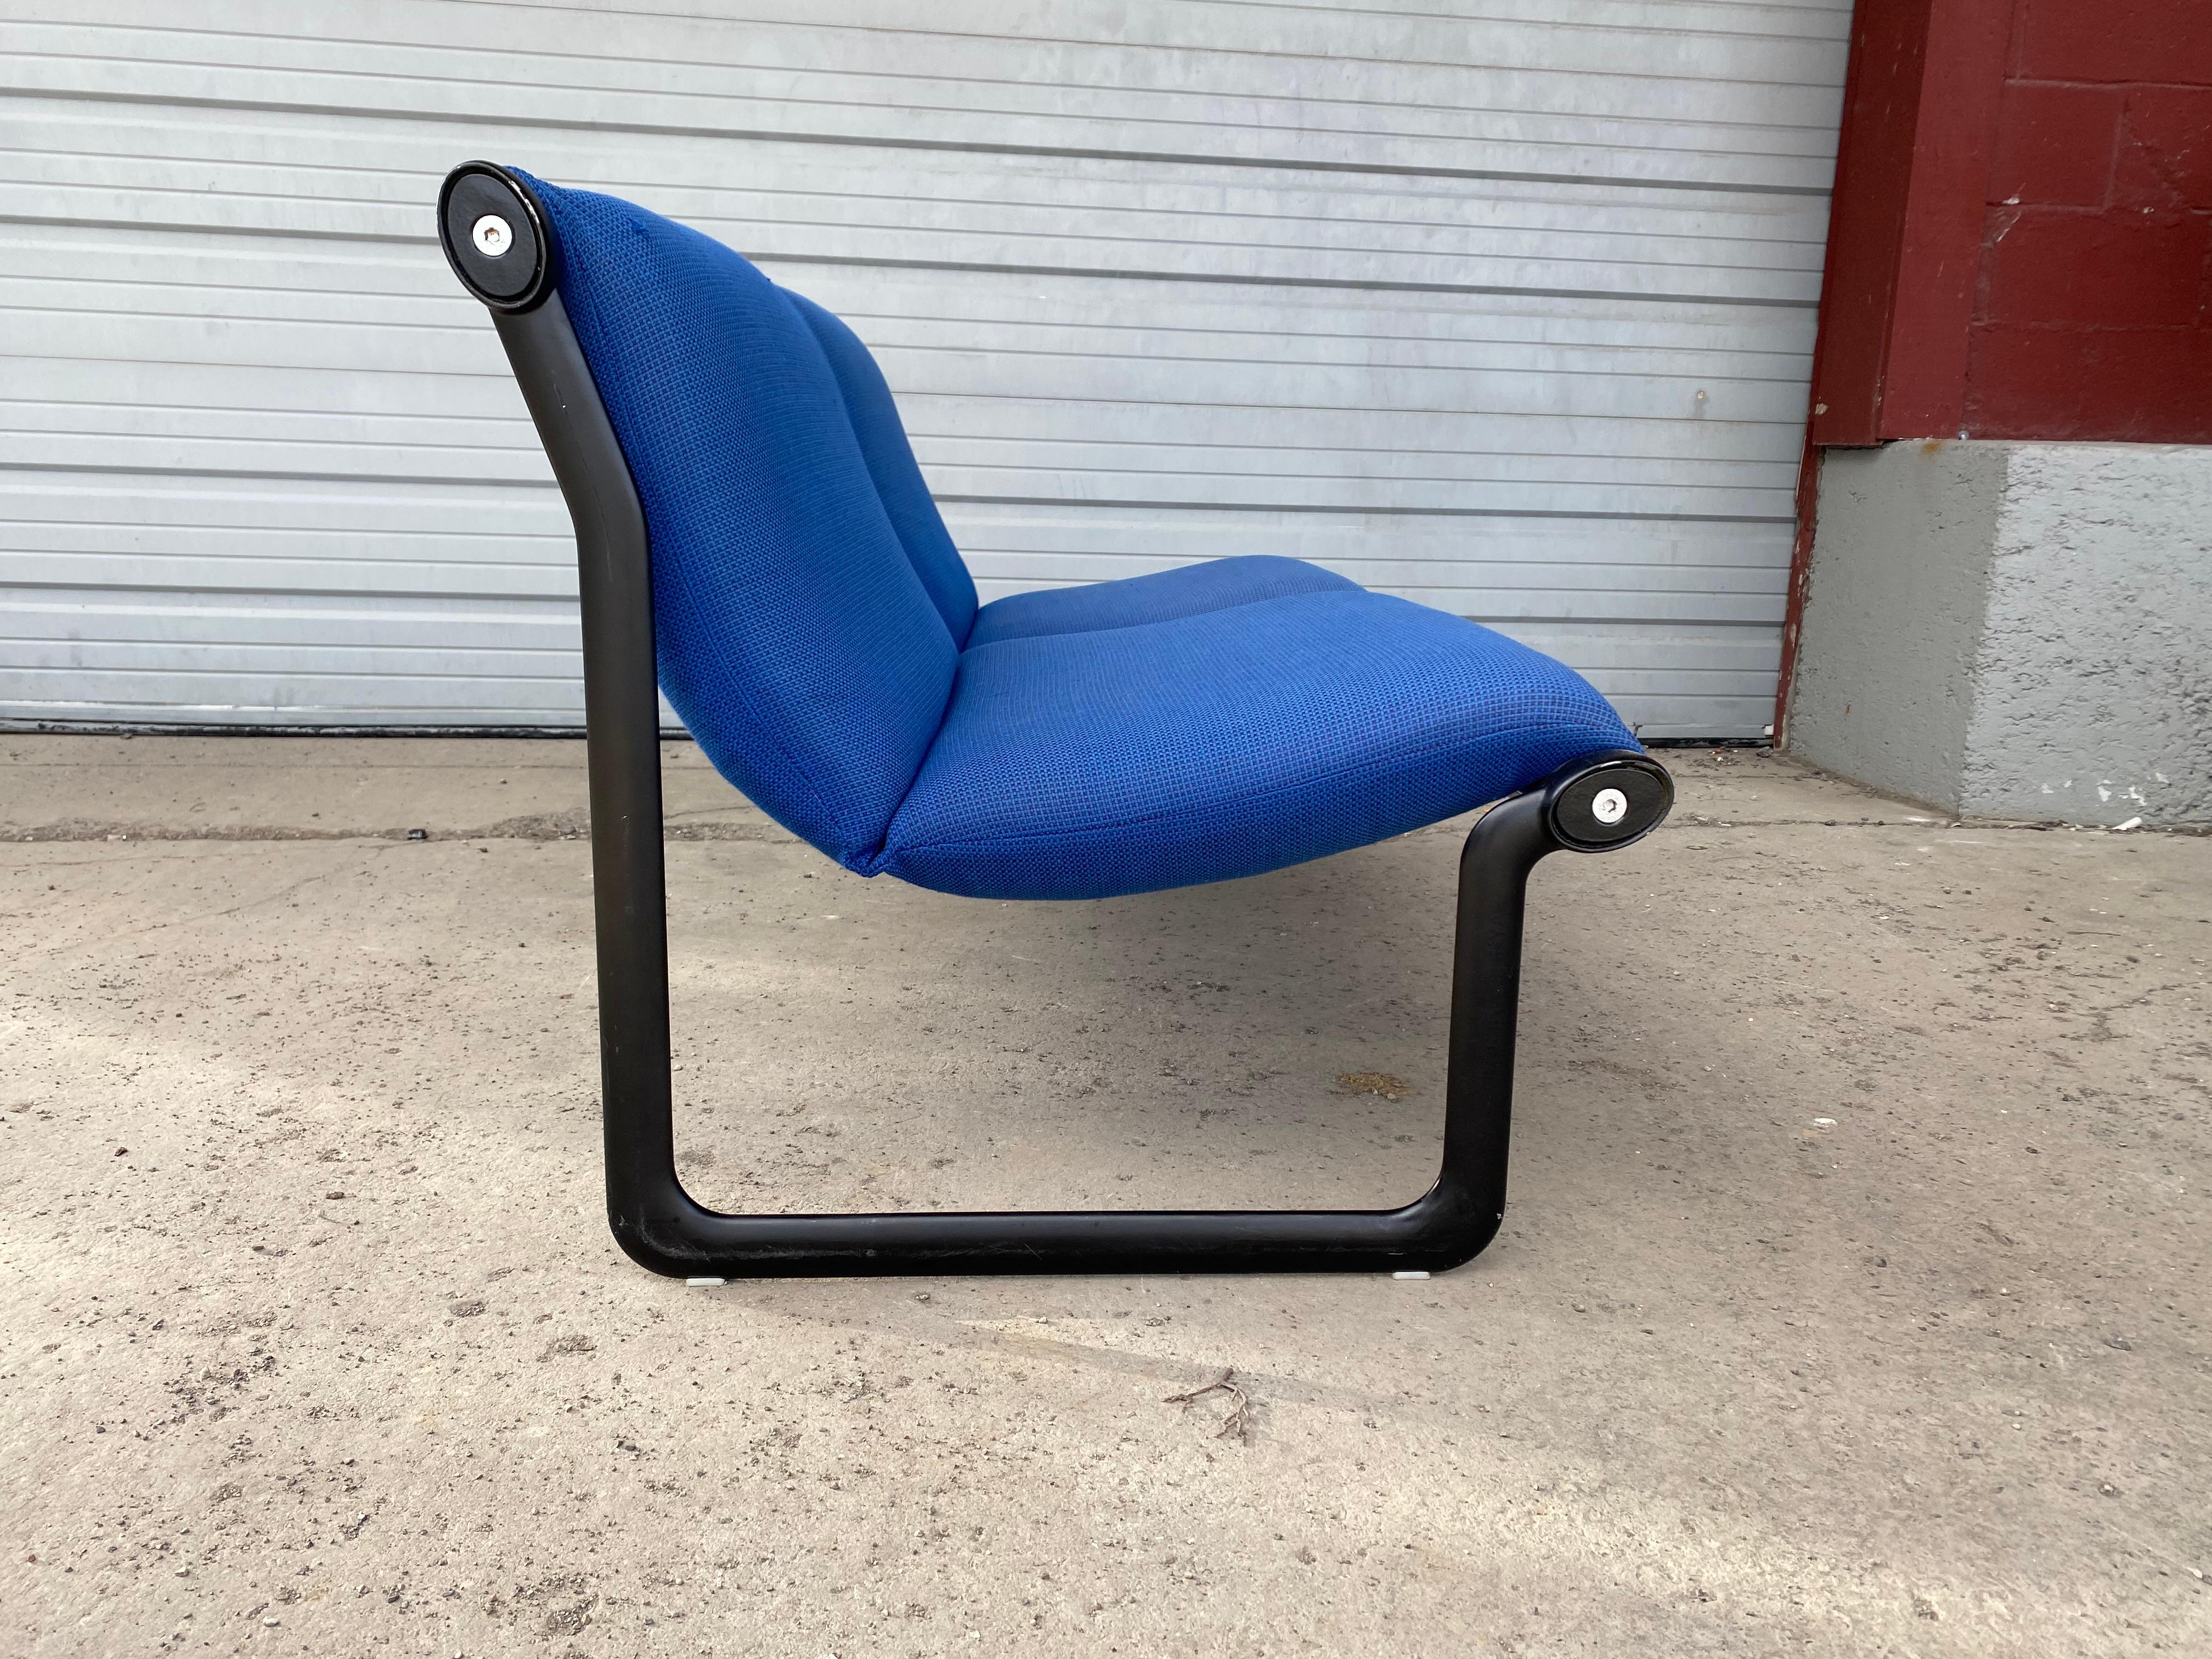 Classic MODERNIST Two-seat sling sofa by Bruce Hannah and Andrew Morrison for Knoll in vibrant 1970s electric blue knoll wool fabric and powder-coated steel.minor staining,(see photo) Hand delivery avail to New York City or anywhere en route from